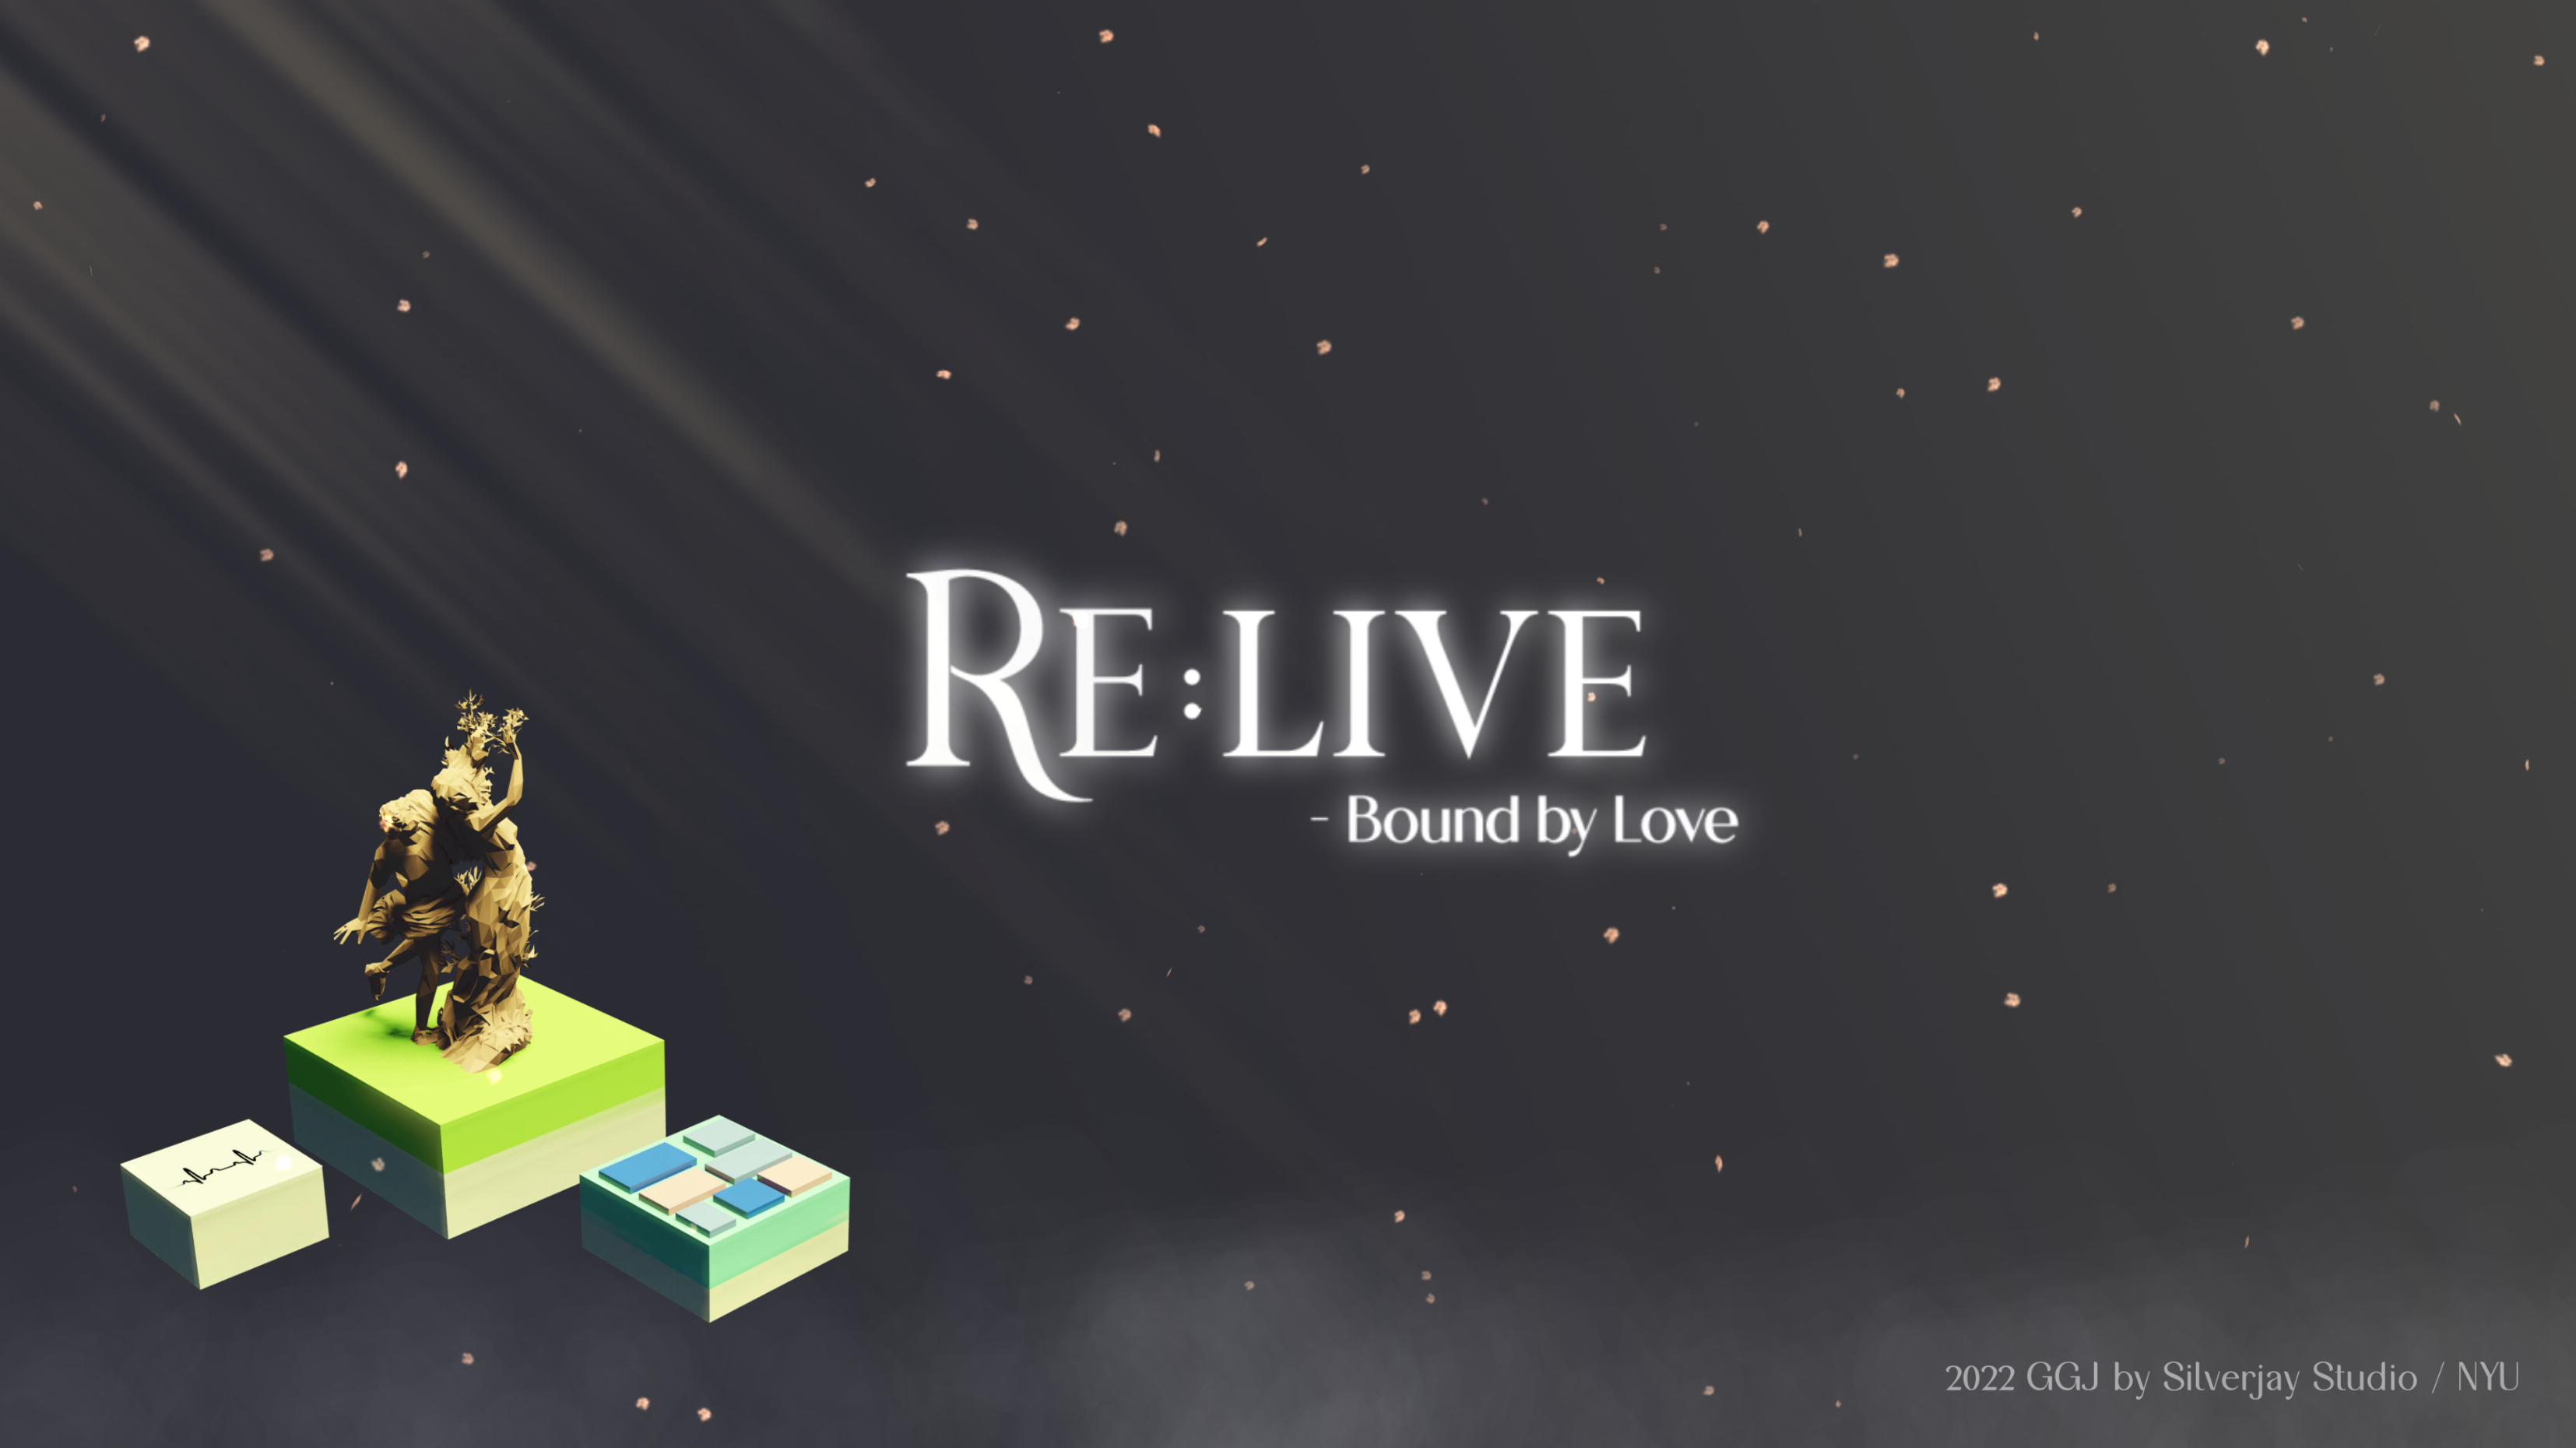 Re:Live - Bound by Love